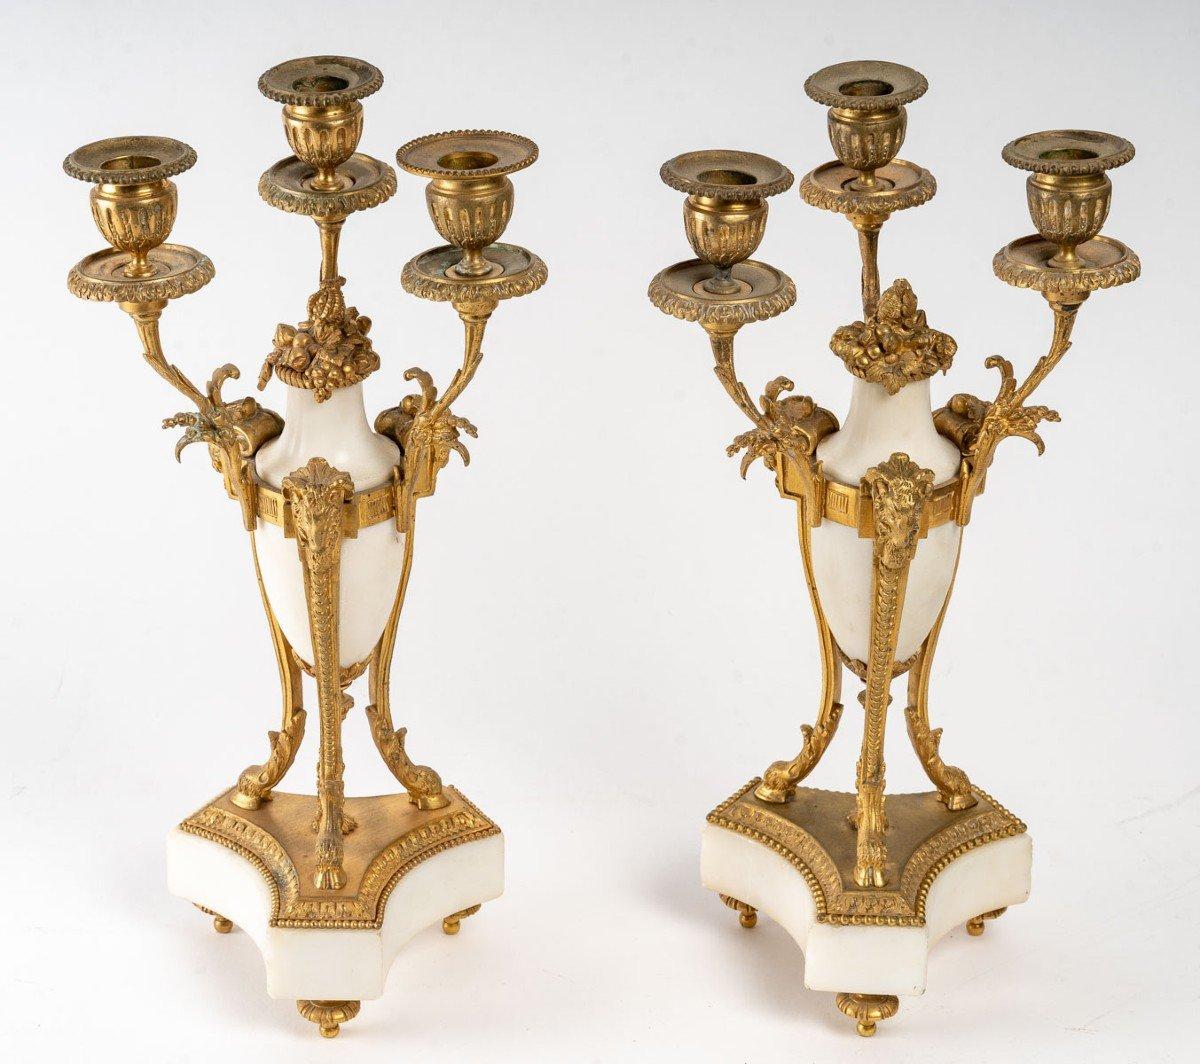 European Pair of Candelabras in Gilt Bronze and White Marble